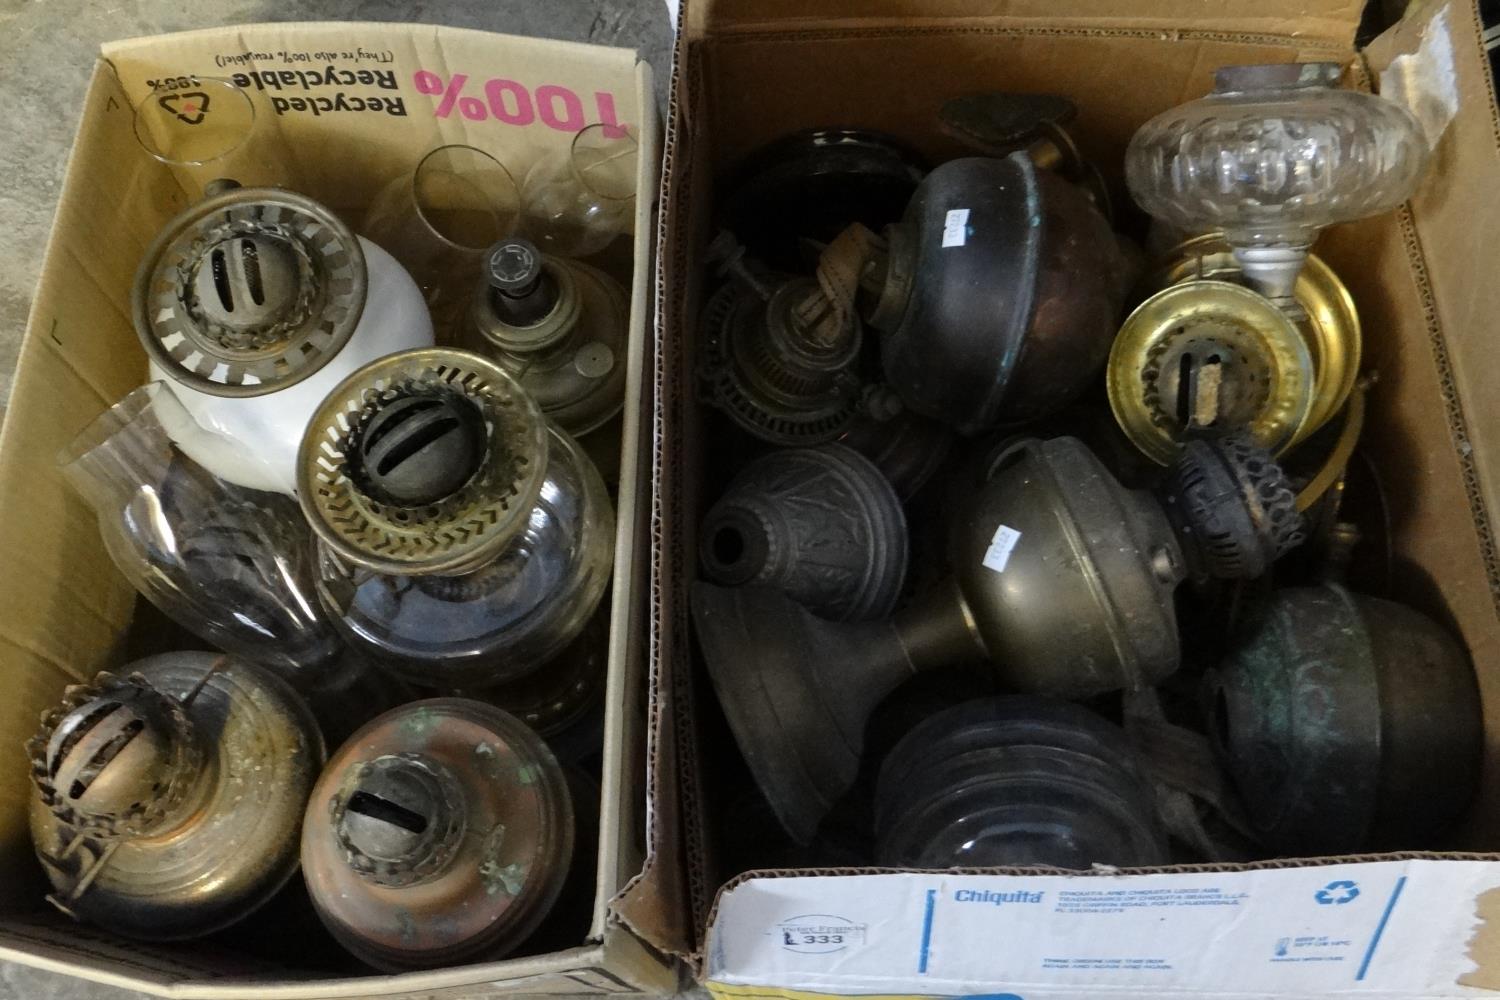 Two boxes of oil burners and oil burner parts; glass reservoirs, metal reservoirs and bases, clear